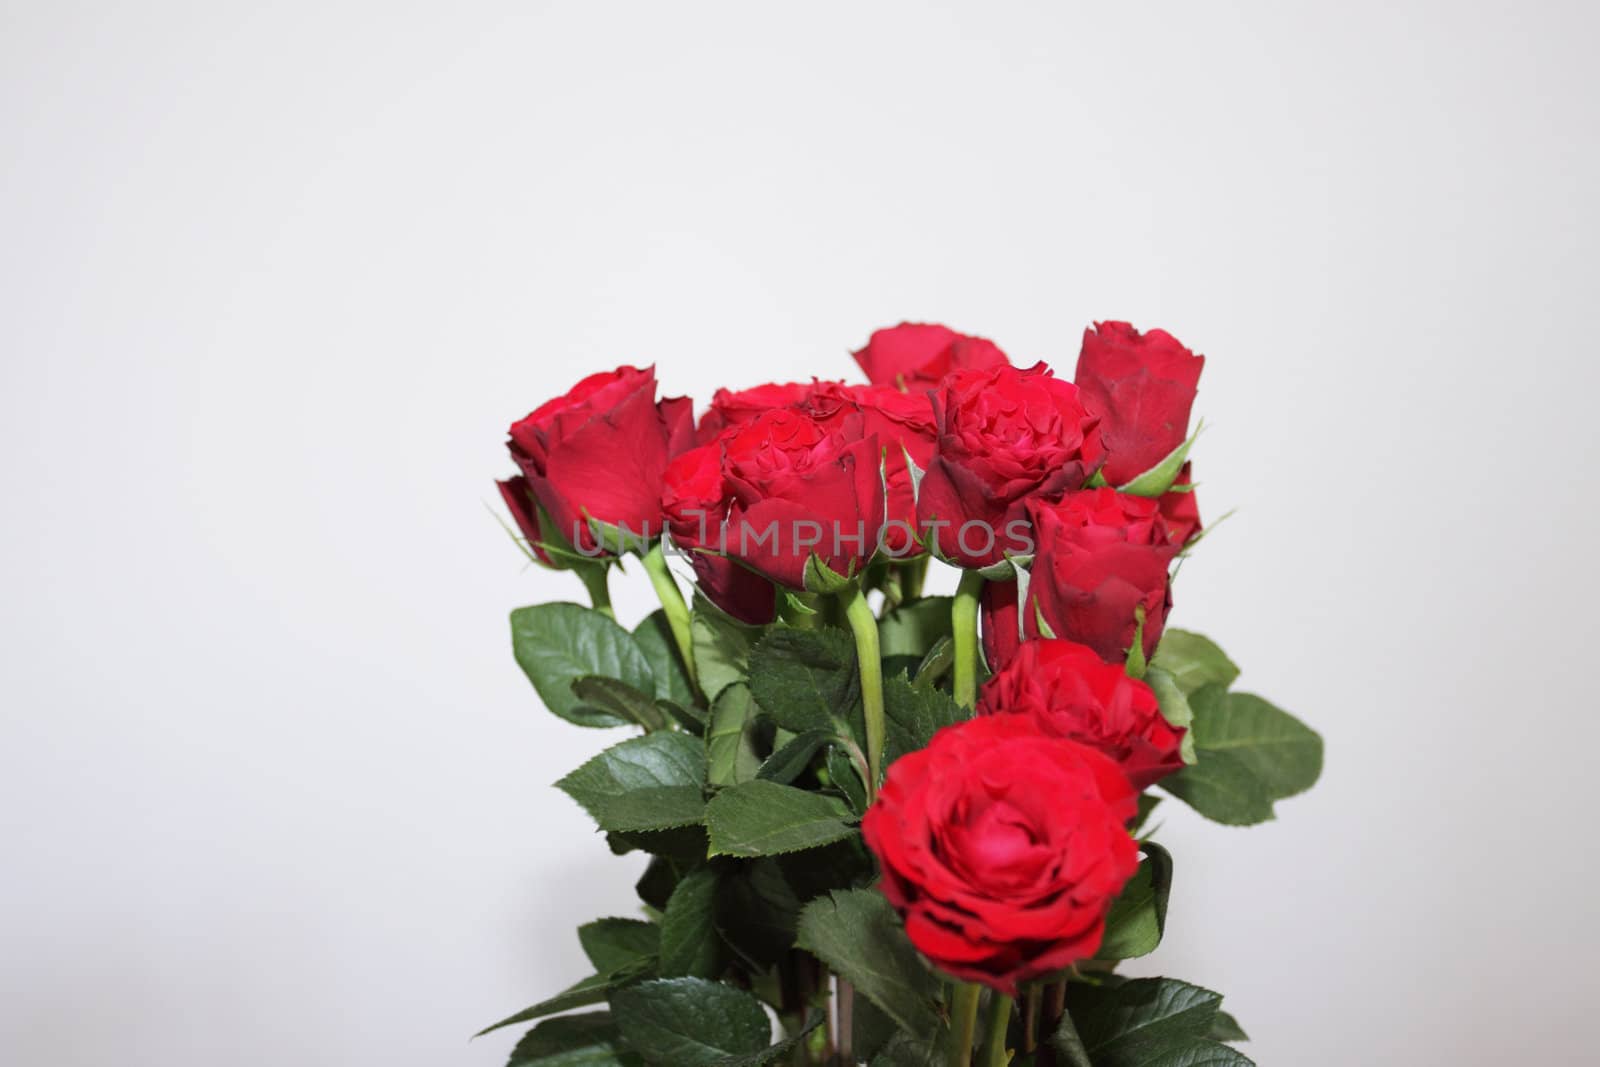 bouquet of red roses in a vase on white background by jp_chretien